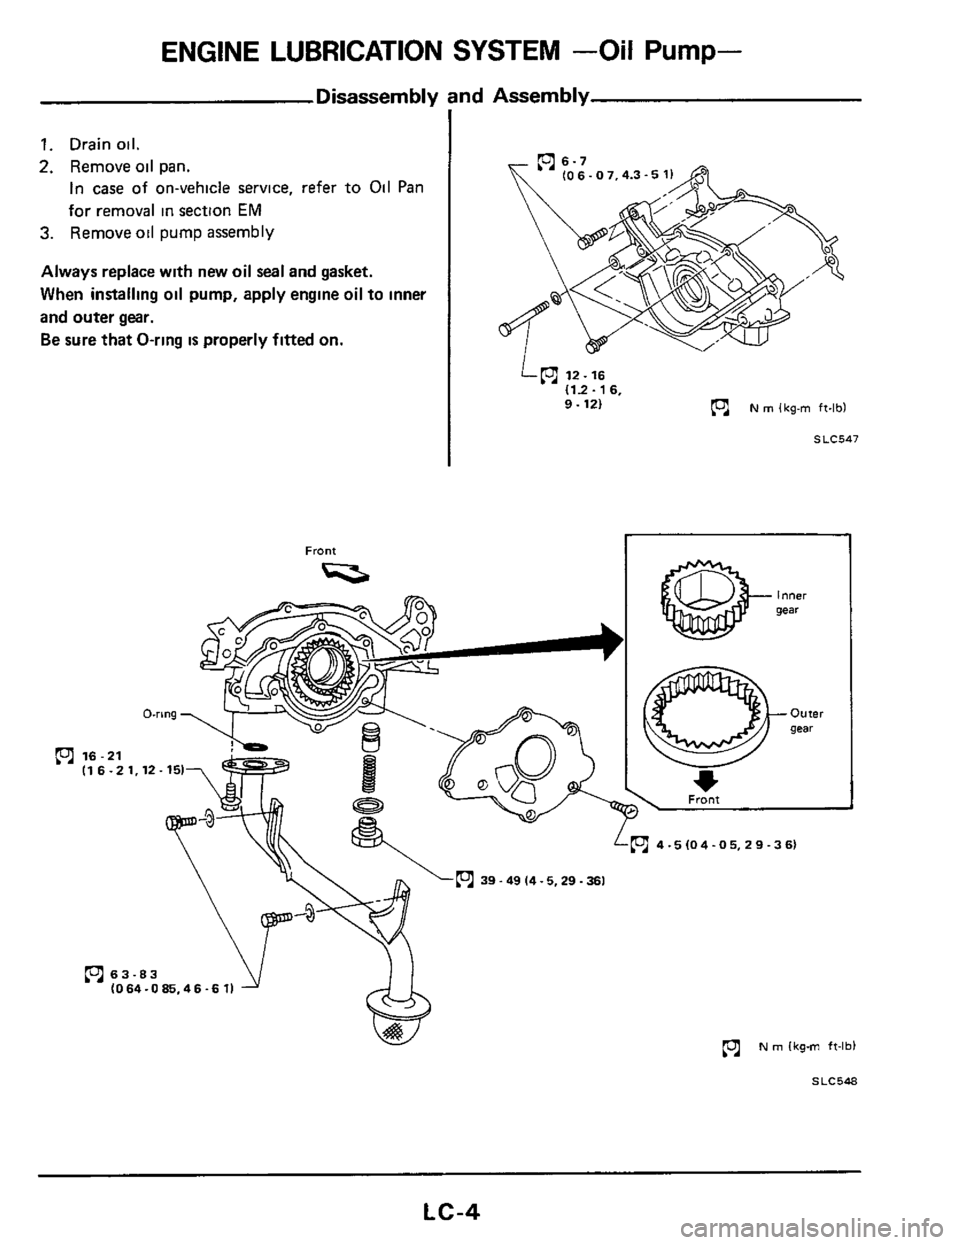 NISSAN 300ZX 1984 Z31 Engine Lubrication And Cooling System Workshop Manual ENGINE LUBRICATION  SYSTEM -Oil Pump- 
Disassembly and  Assembly 
1 
1. Drain oil. 
2. Remove oil pan. 
In case of on-vehicle service, refer to Oil Pan 
for  removal 
in section EM 
3. Remove oil pump